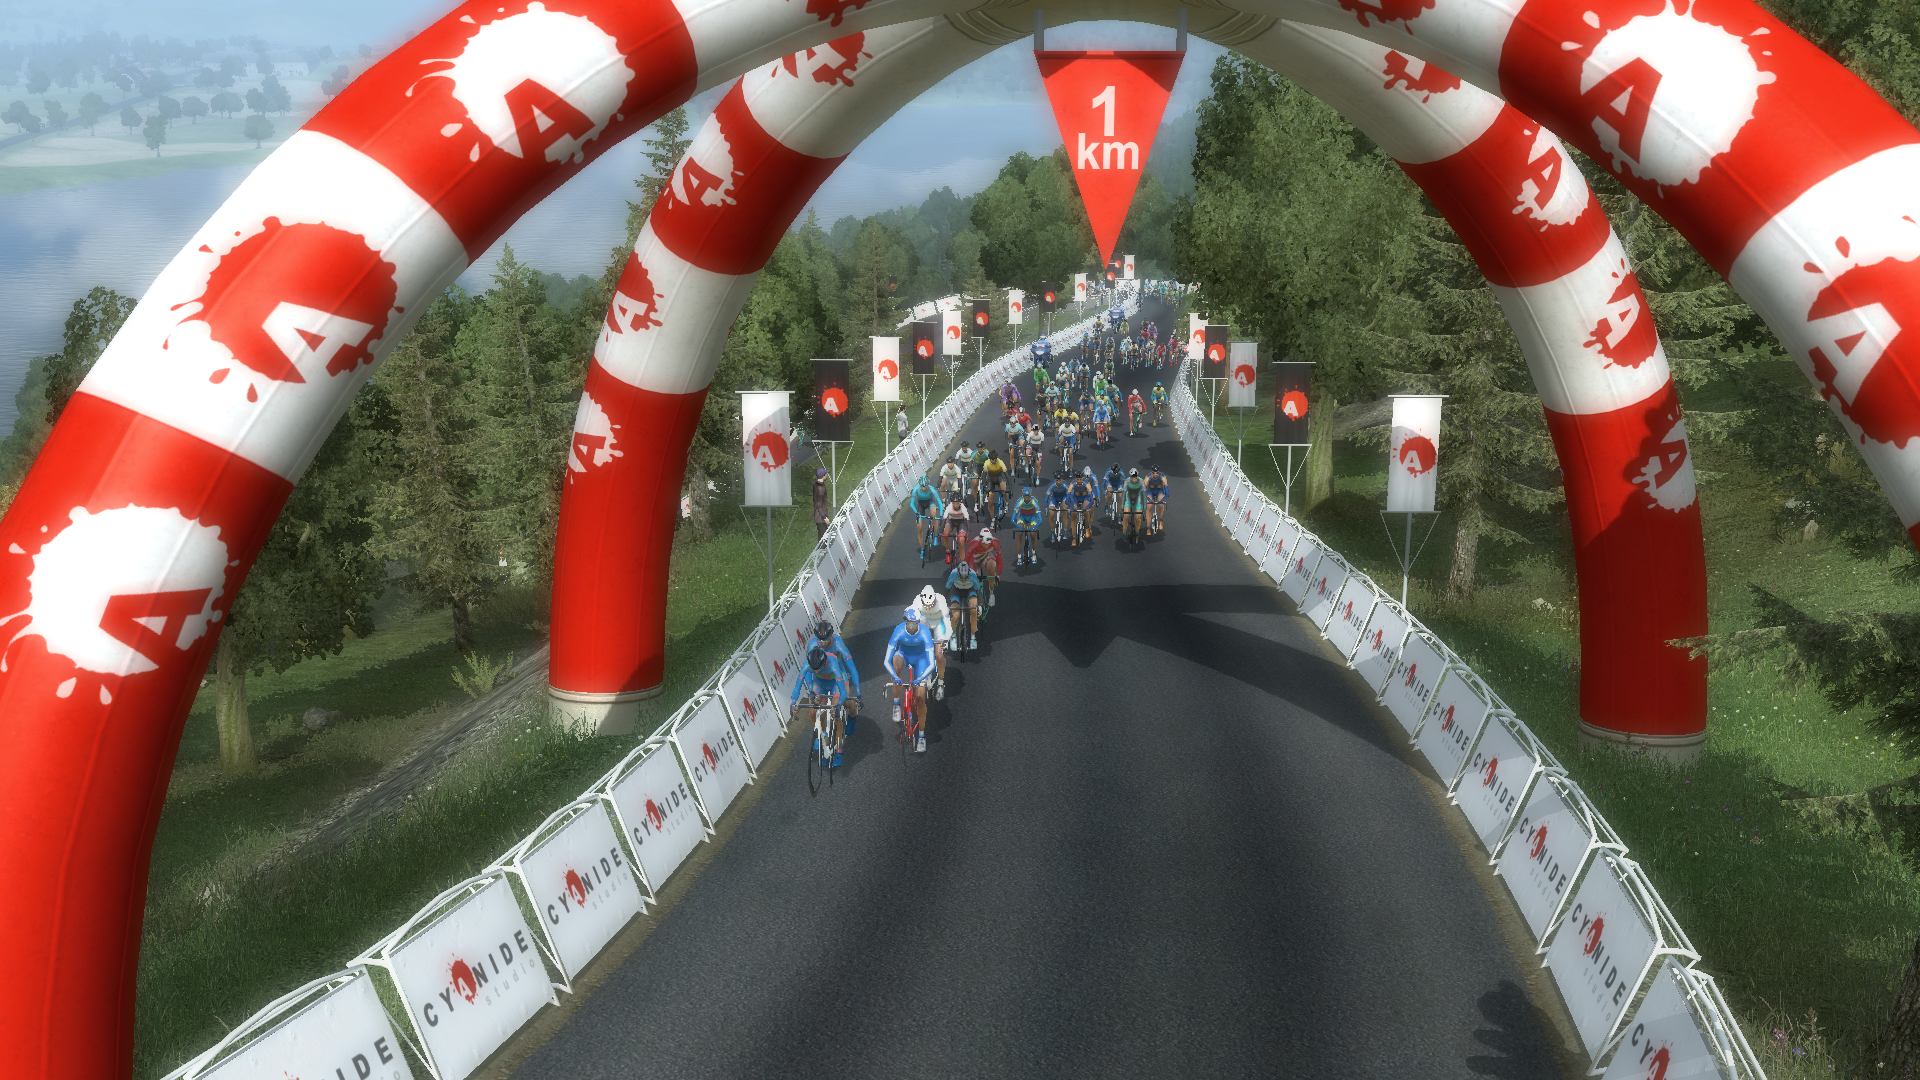 flamme rouge